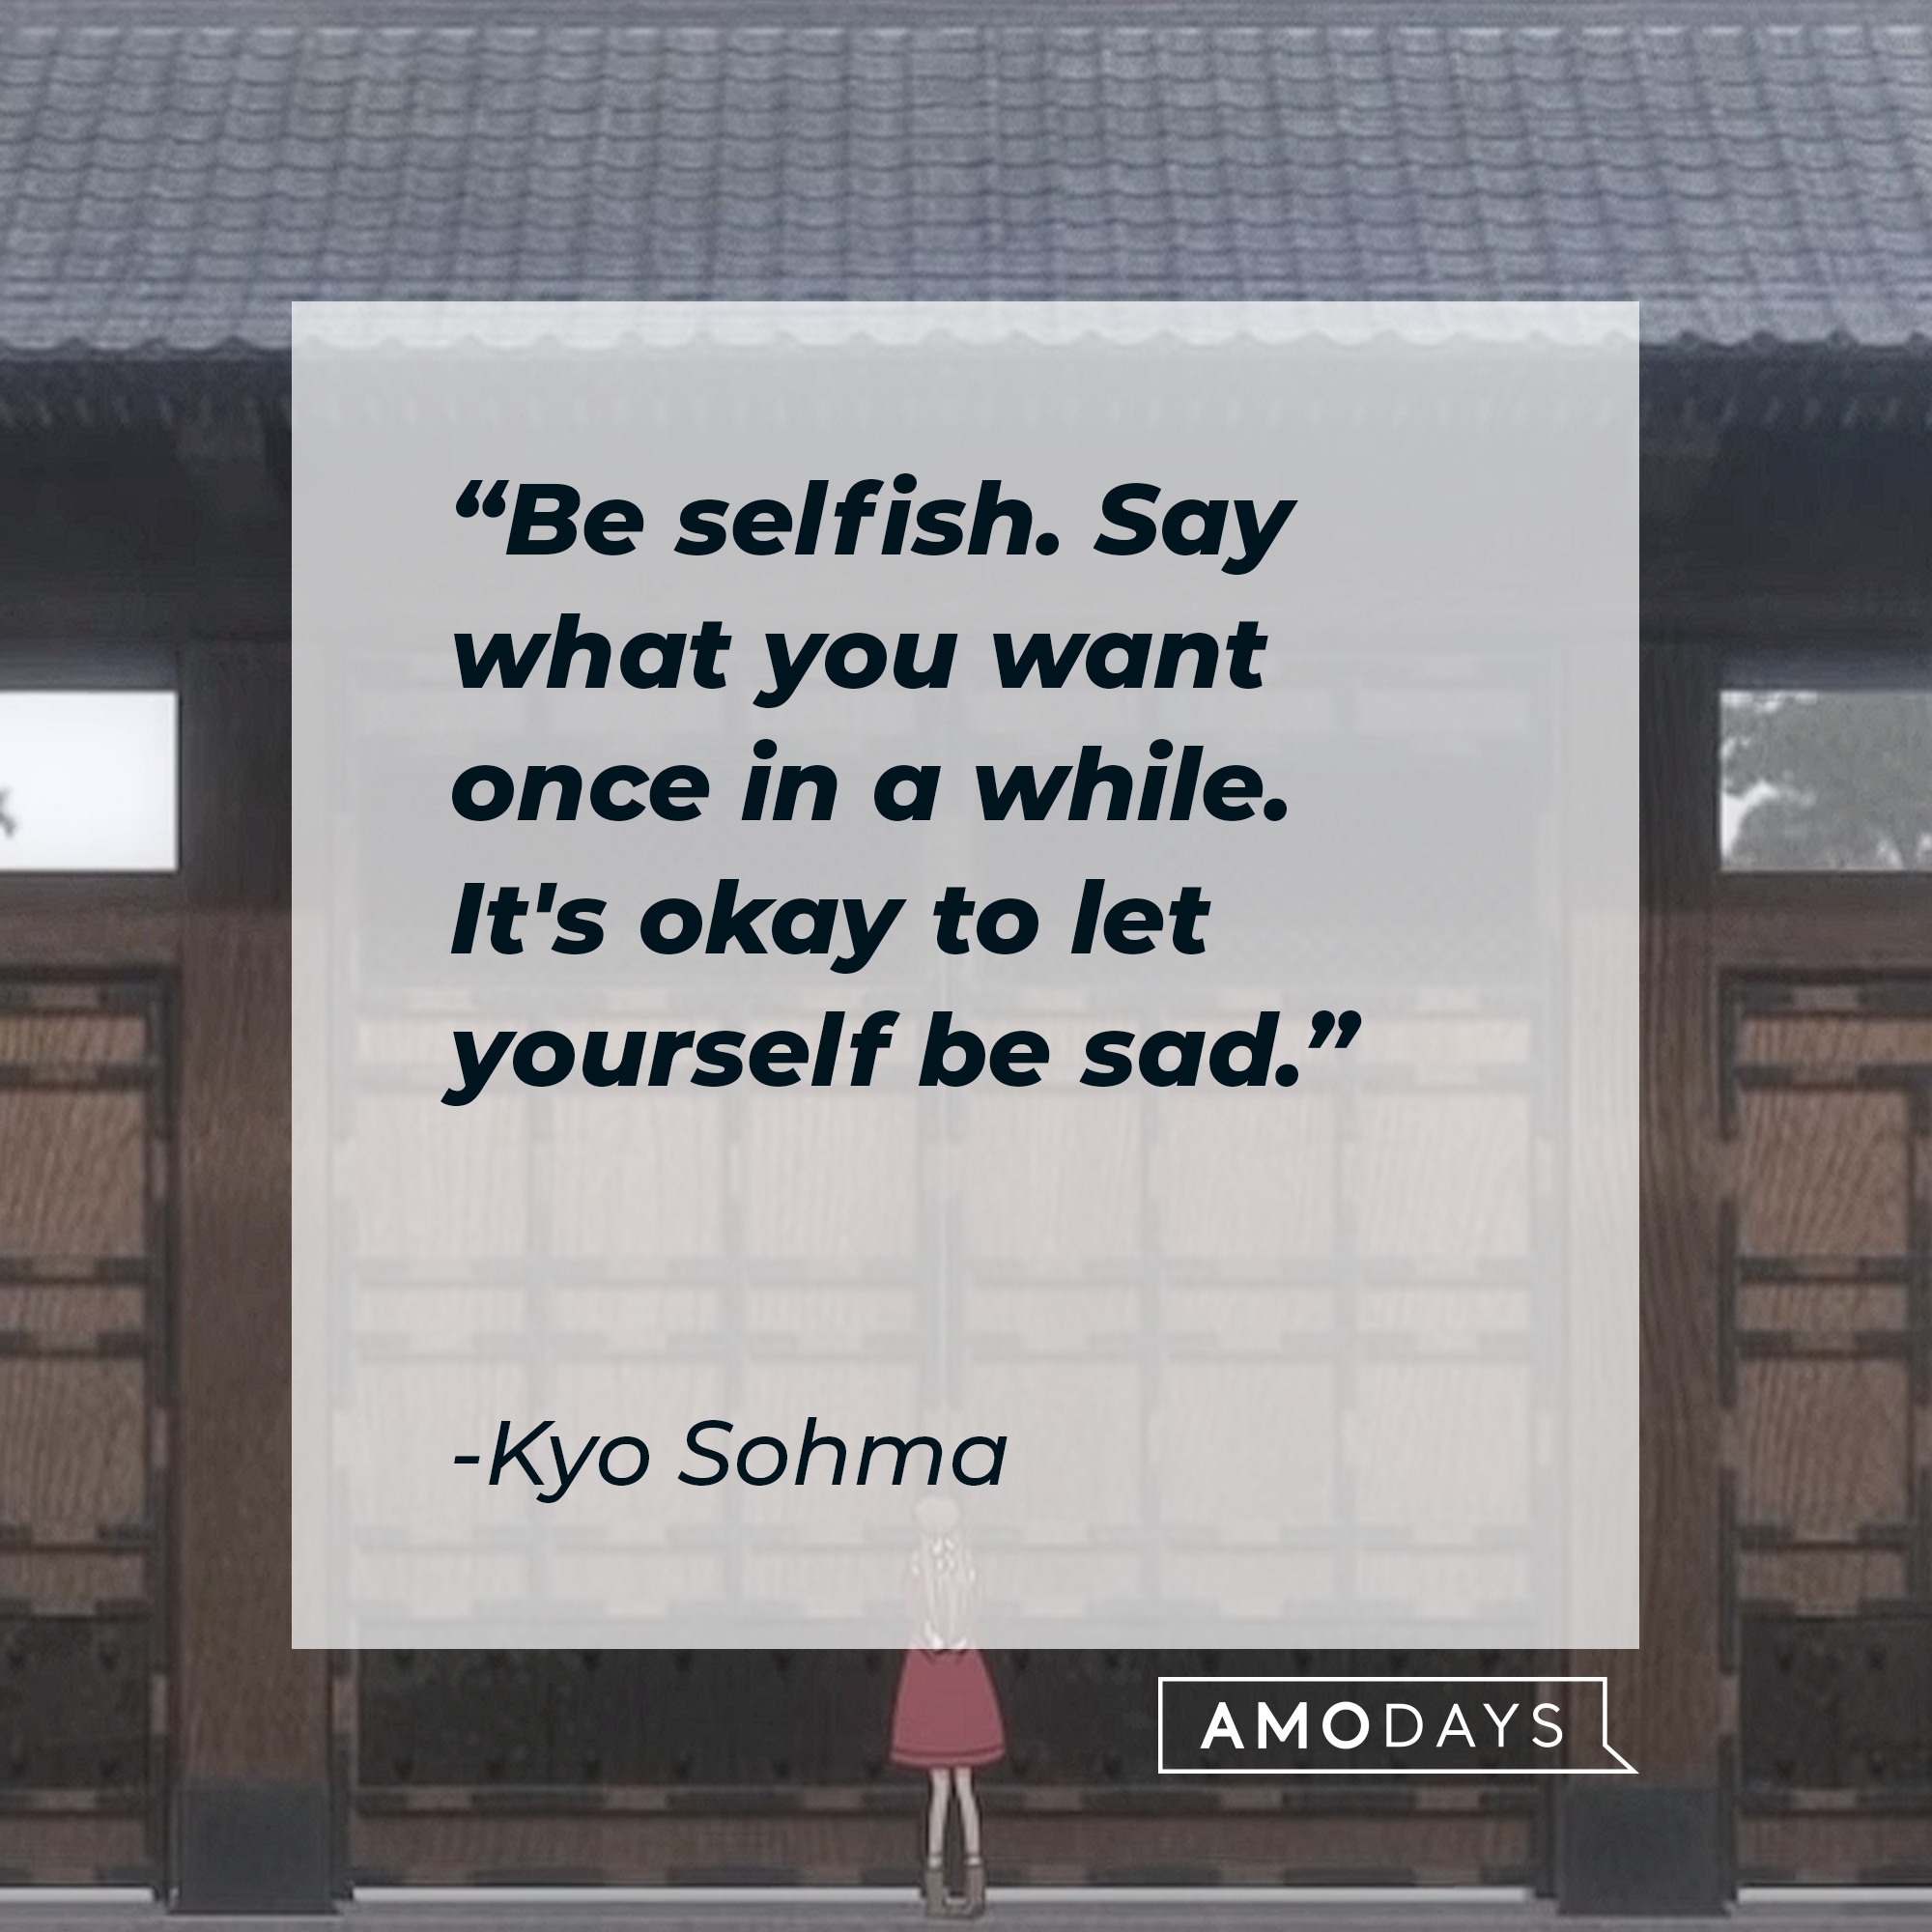 Kyo Sohma's quote: "Be selfish. Say what you want once in a while. It's okay to let yourself be sad." | Image: youtube.com/Crunchyroll Collection